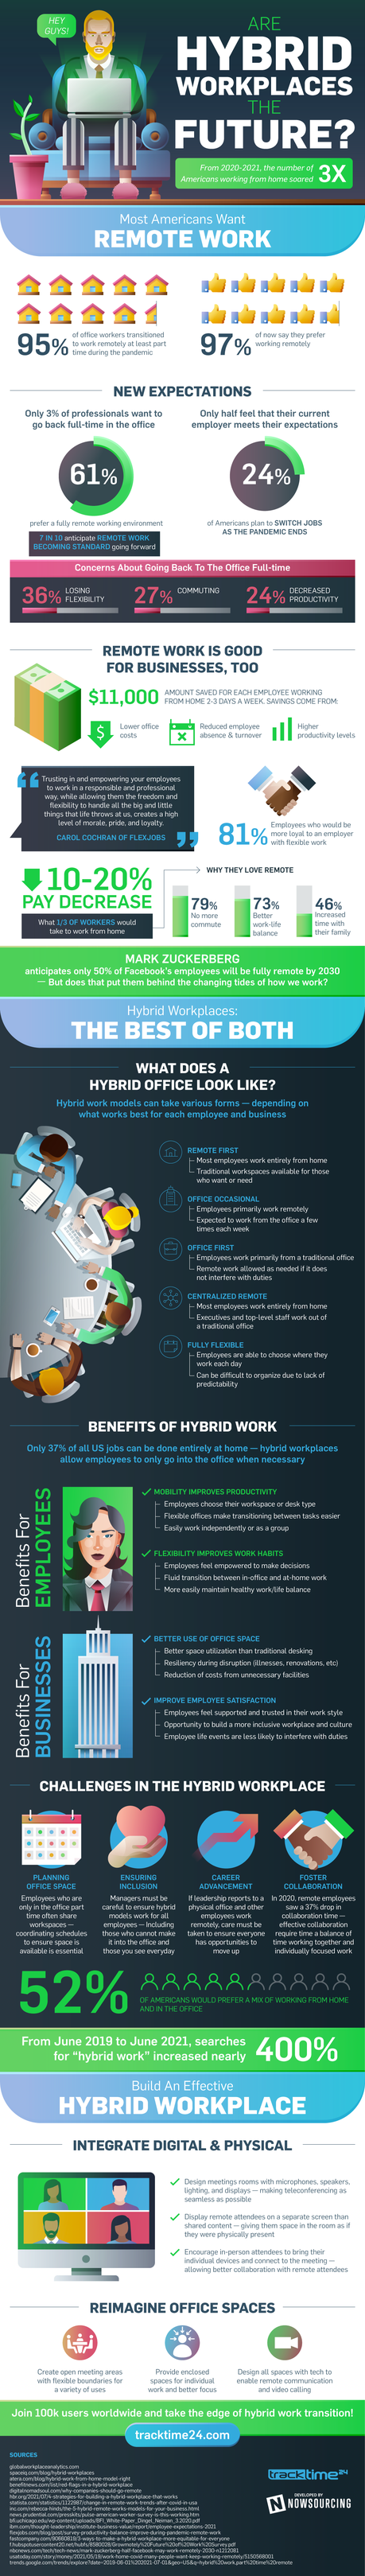 Are Hybrid Workplaces The Future? - TrackTime24.com